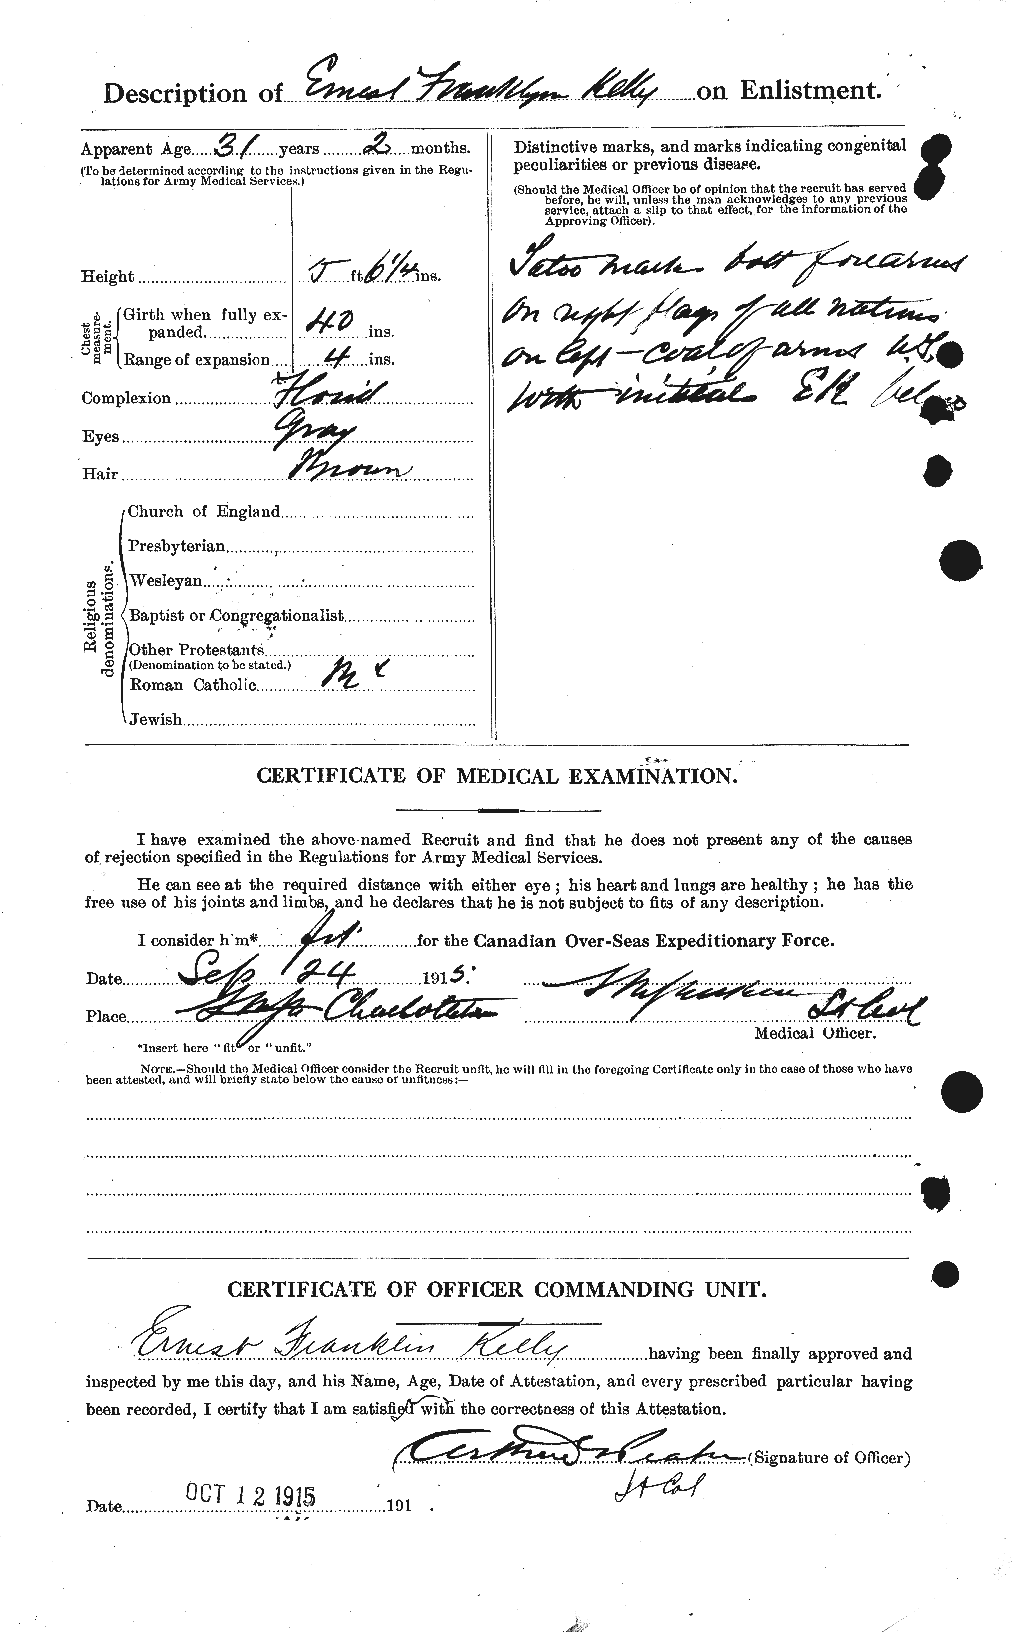 Personnel Records of the First World War - CEF 431363b